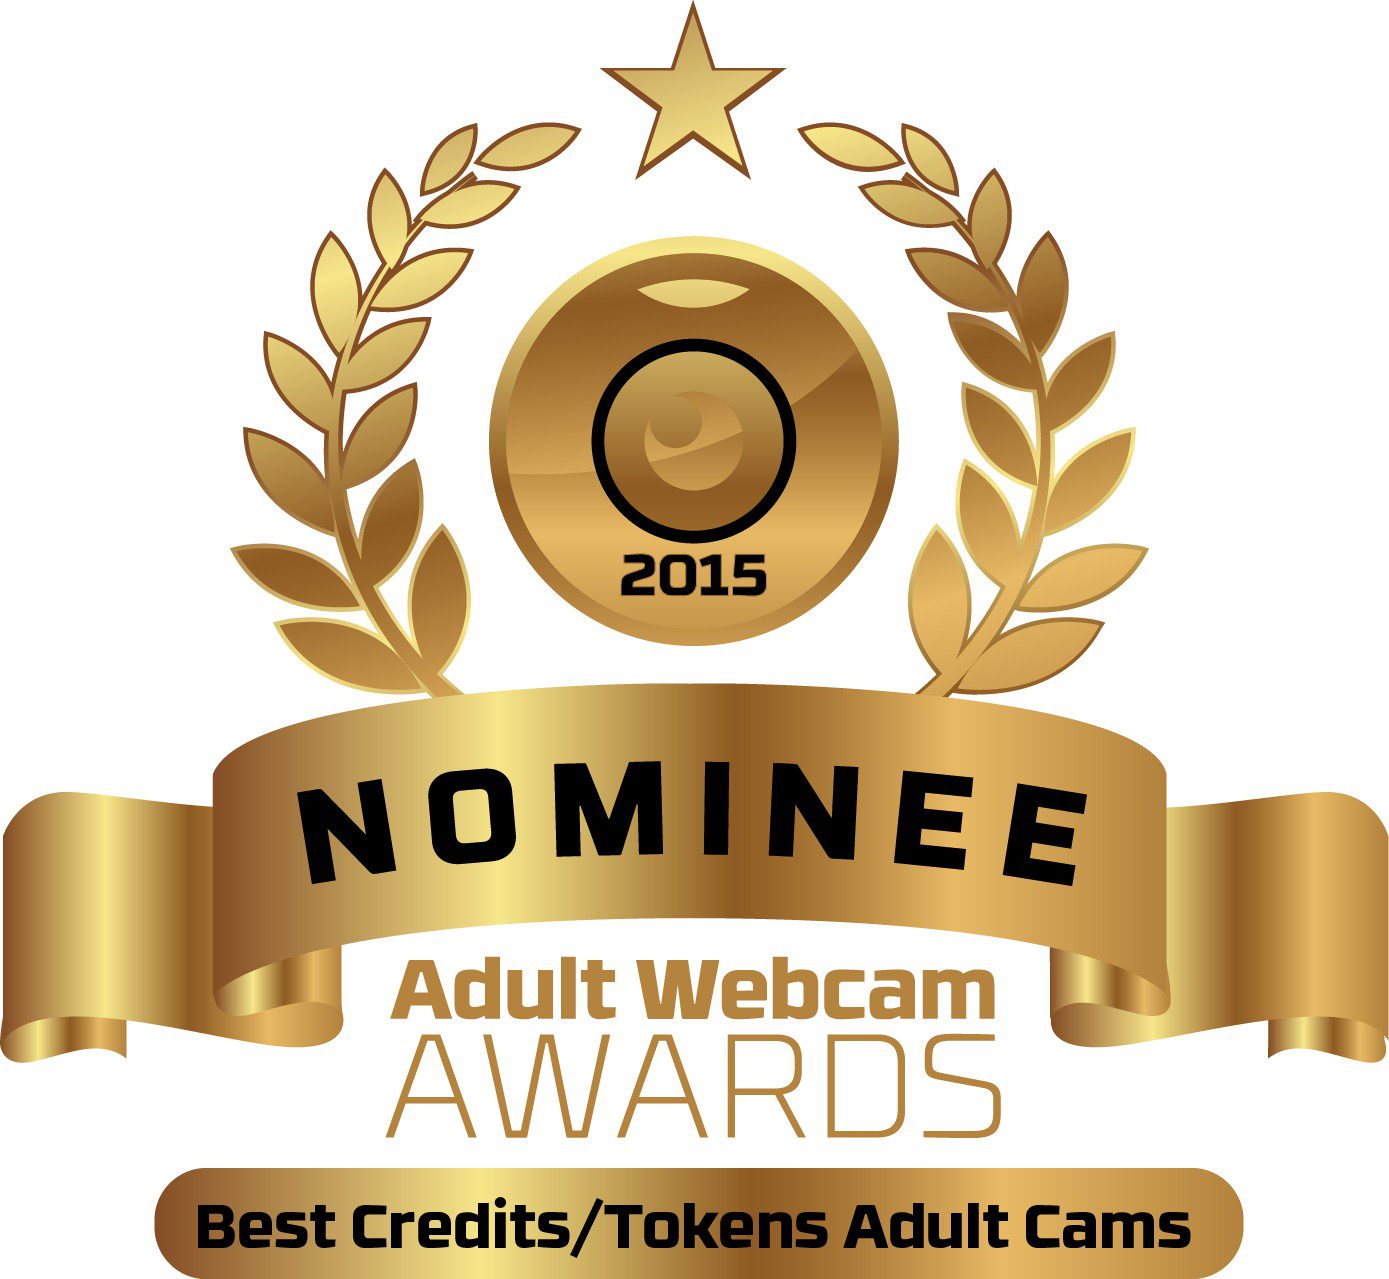 Best Credits Tokens Adult Cam Site Nominee - Adult Webcam Awards